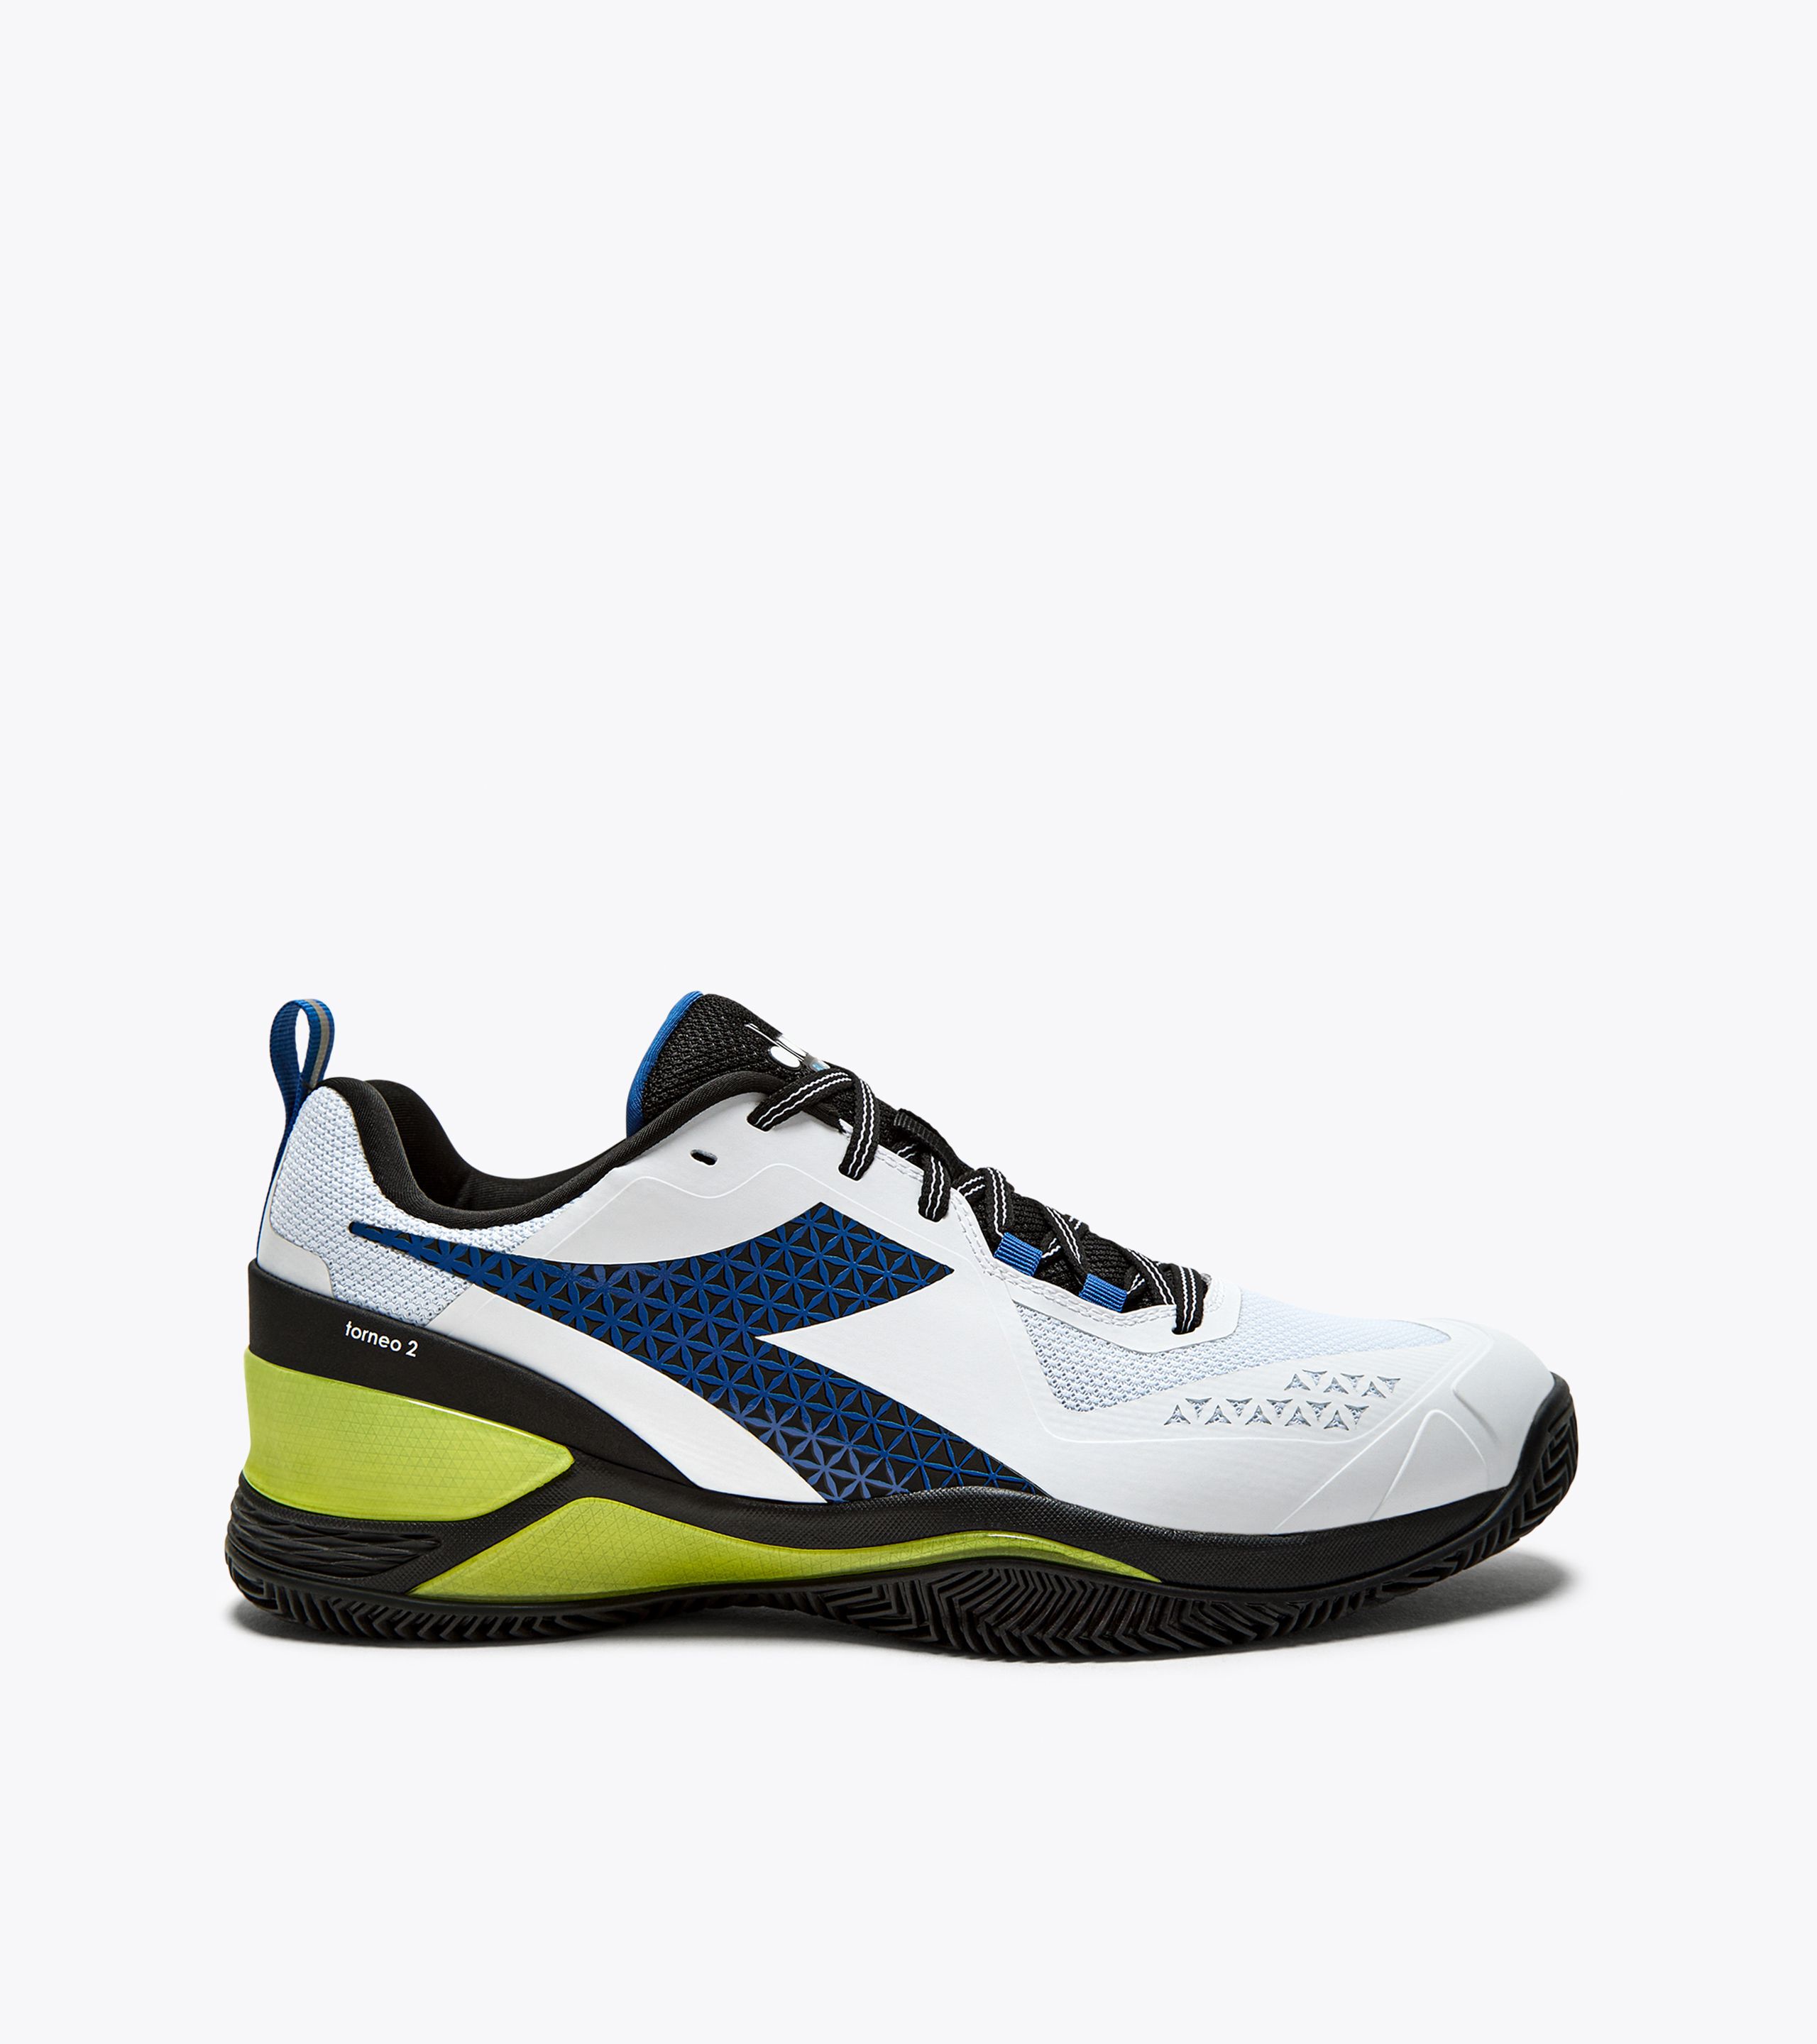 BLUSHIELD TORNEO 2 CLAY Tennis shoes for clay court - Men